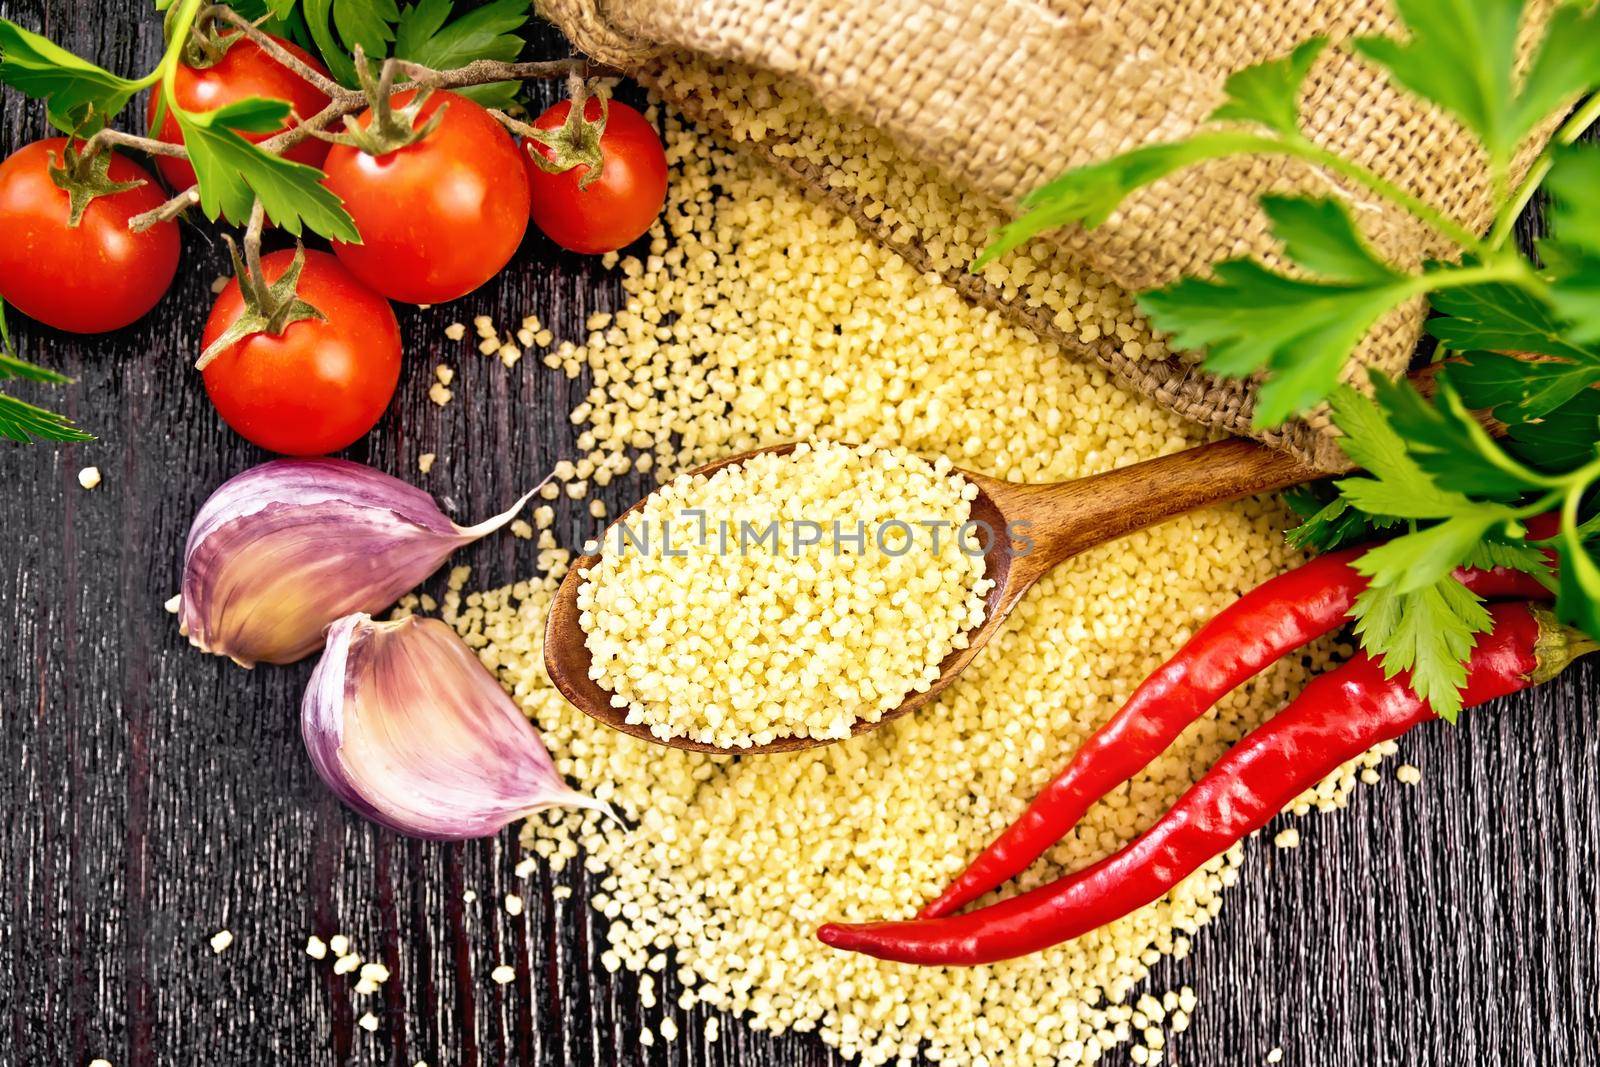 Raw couscous in a spoon and a sack of burlap, tomatoes, hot peppers, herbs and garlic on wooden board background from above